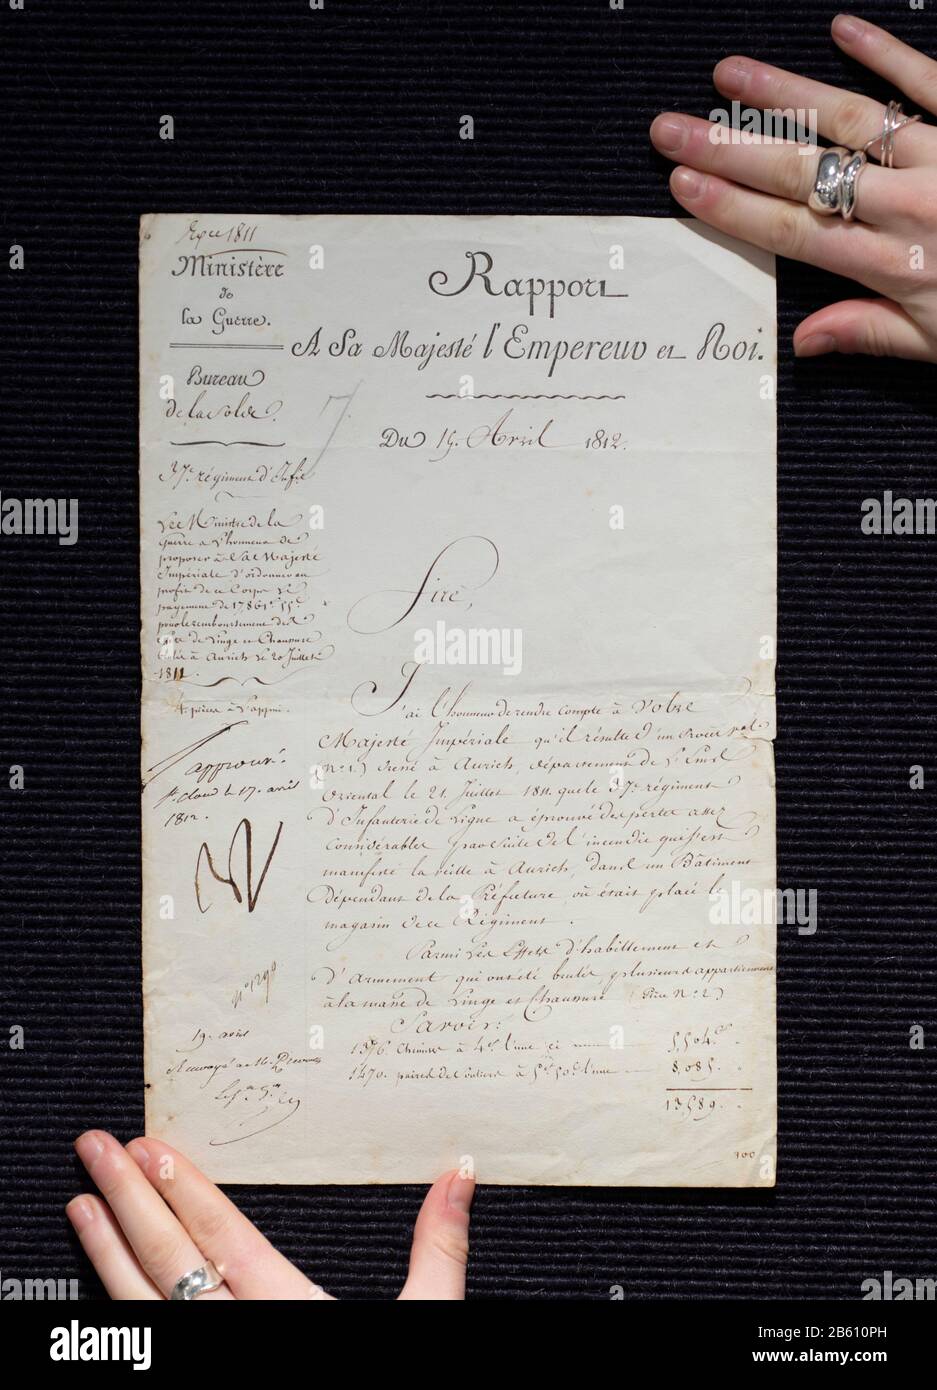 Bonhams, London, UK. 9th March 2020. Fine Books, Atlases, Manuscripts & Historical Photographs on preview prior to the sale in London on 11 March 2020. Image: Napoleon Bonaparte. 1812, Rapport signed as approved by Napoleon ('approuvé N'); with other documents, estimate £800-1,200. Credit: Malcolm Park/Alamy Live News. Stock Photo